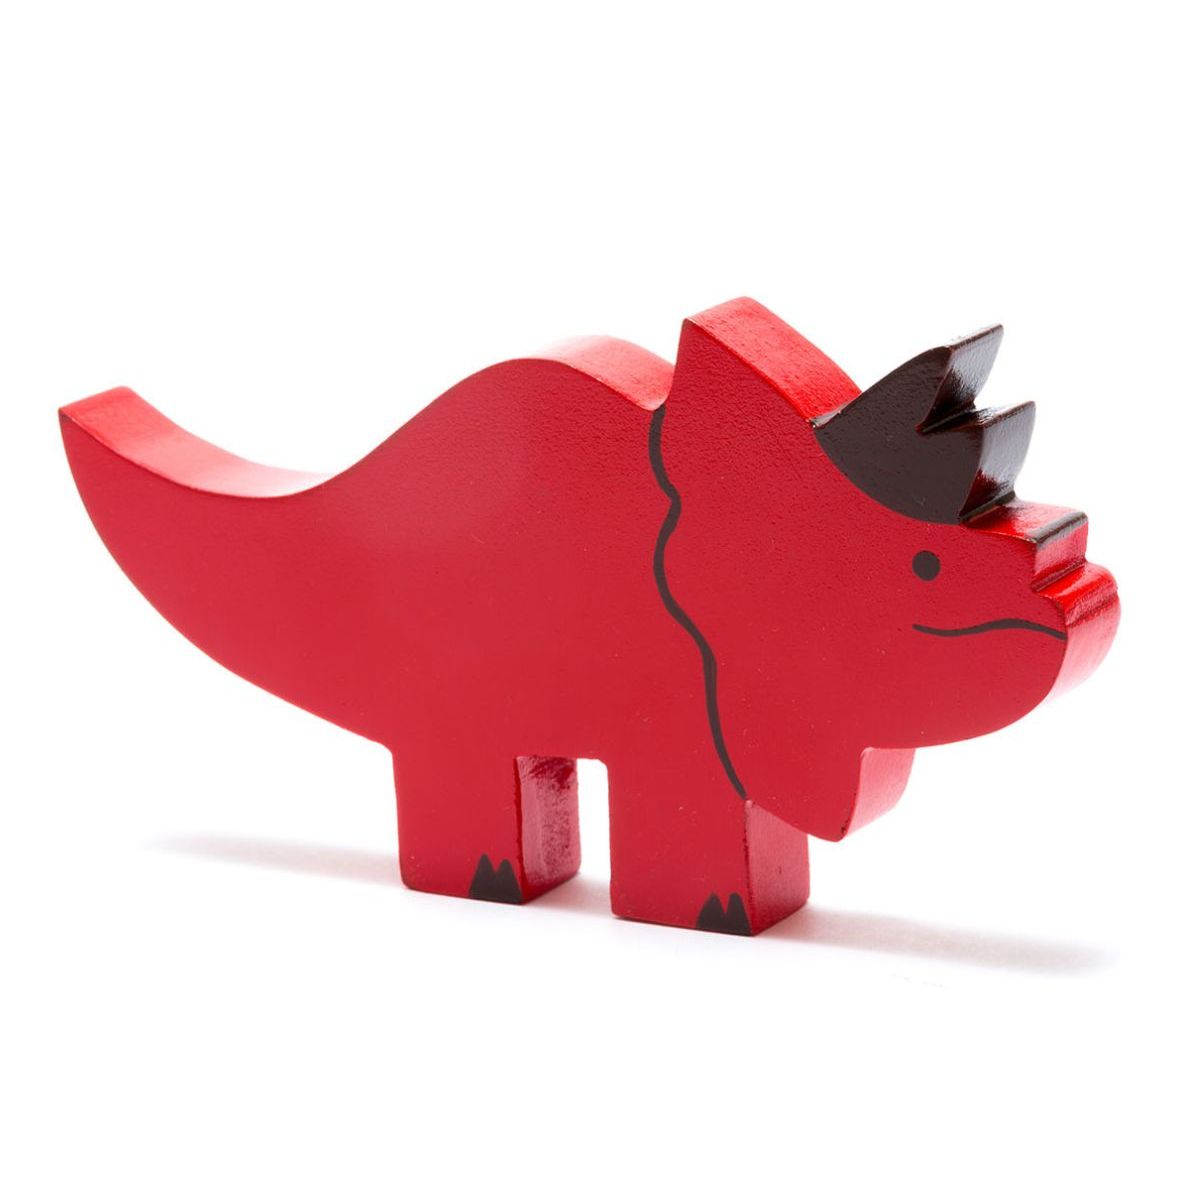 The red and dark brown Triceratops wooden toy facing right.